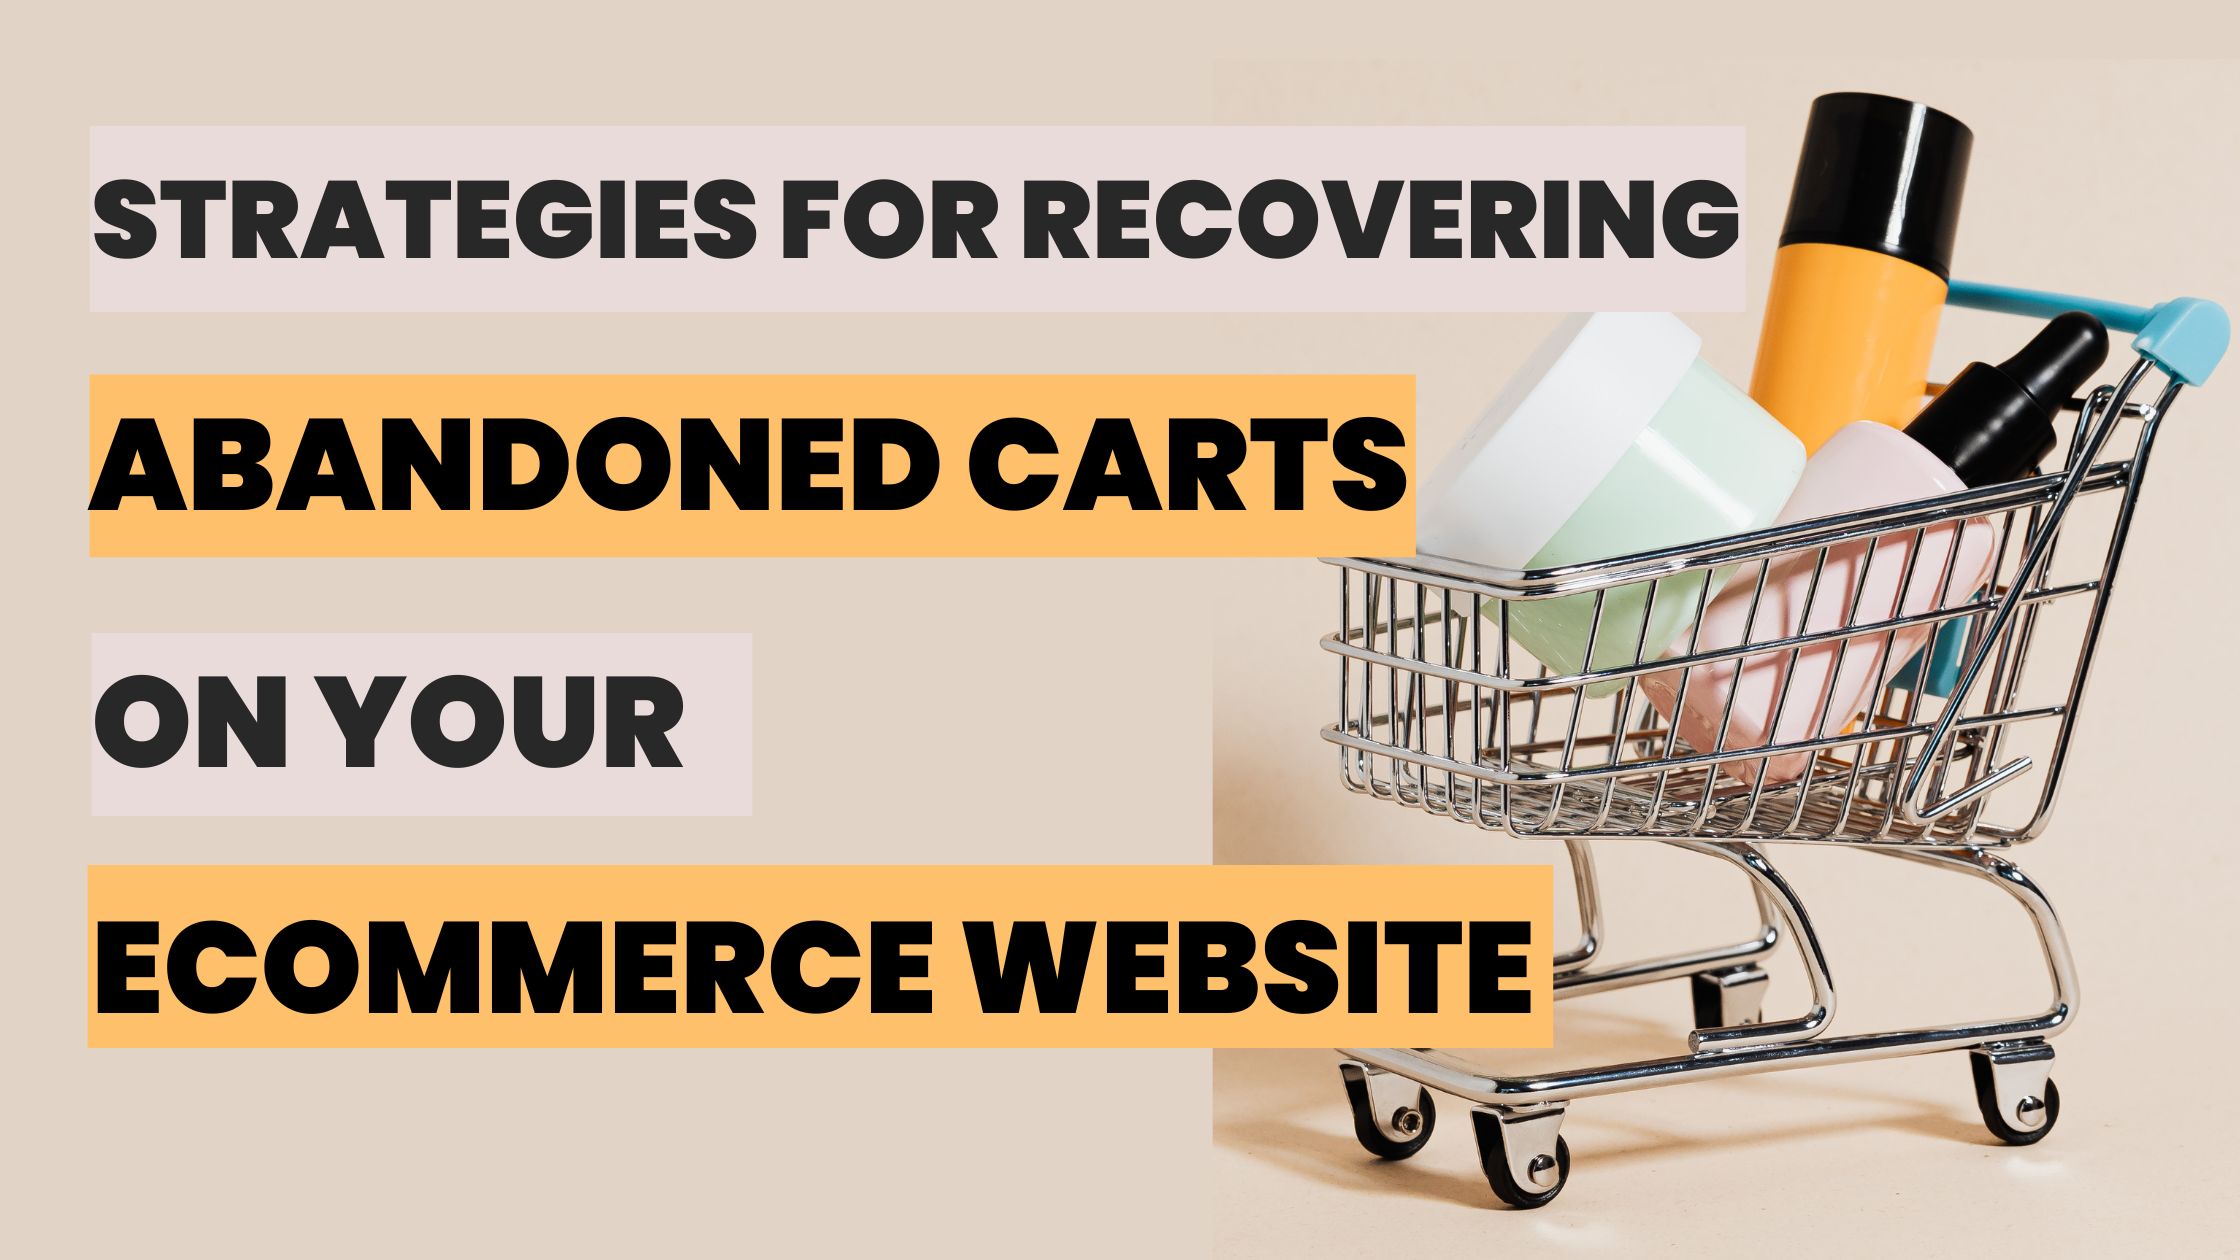 Strategies for Recovering Abandoned Carts on Your eCommerce Website